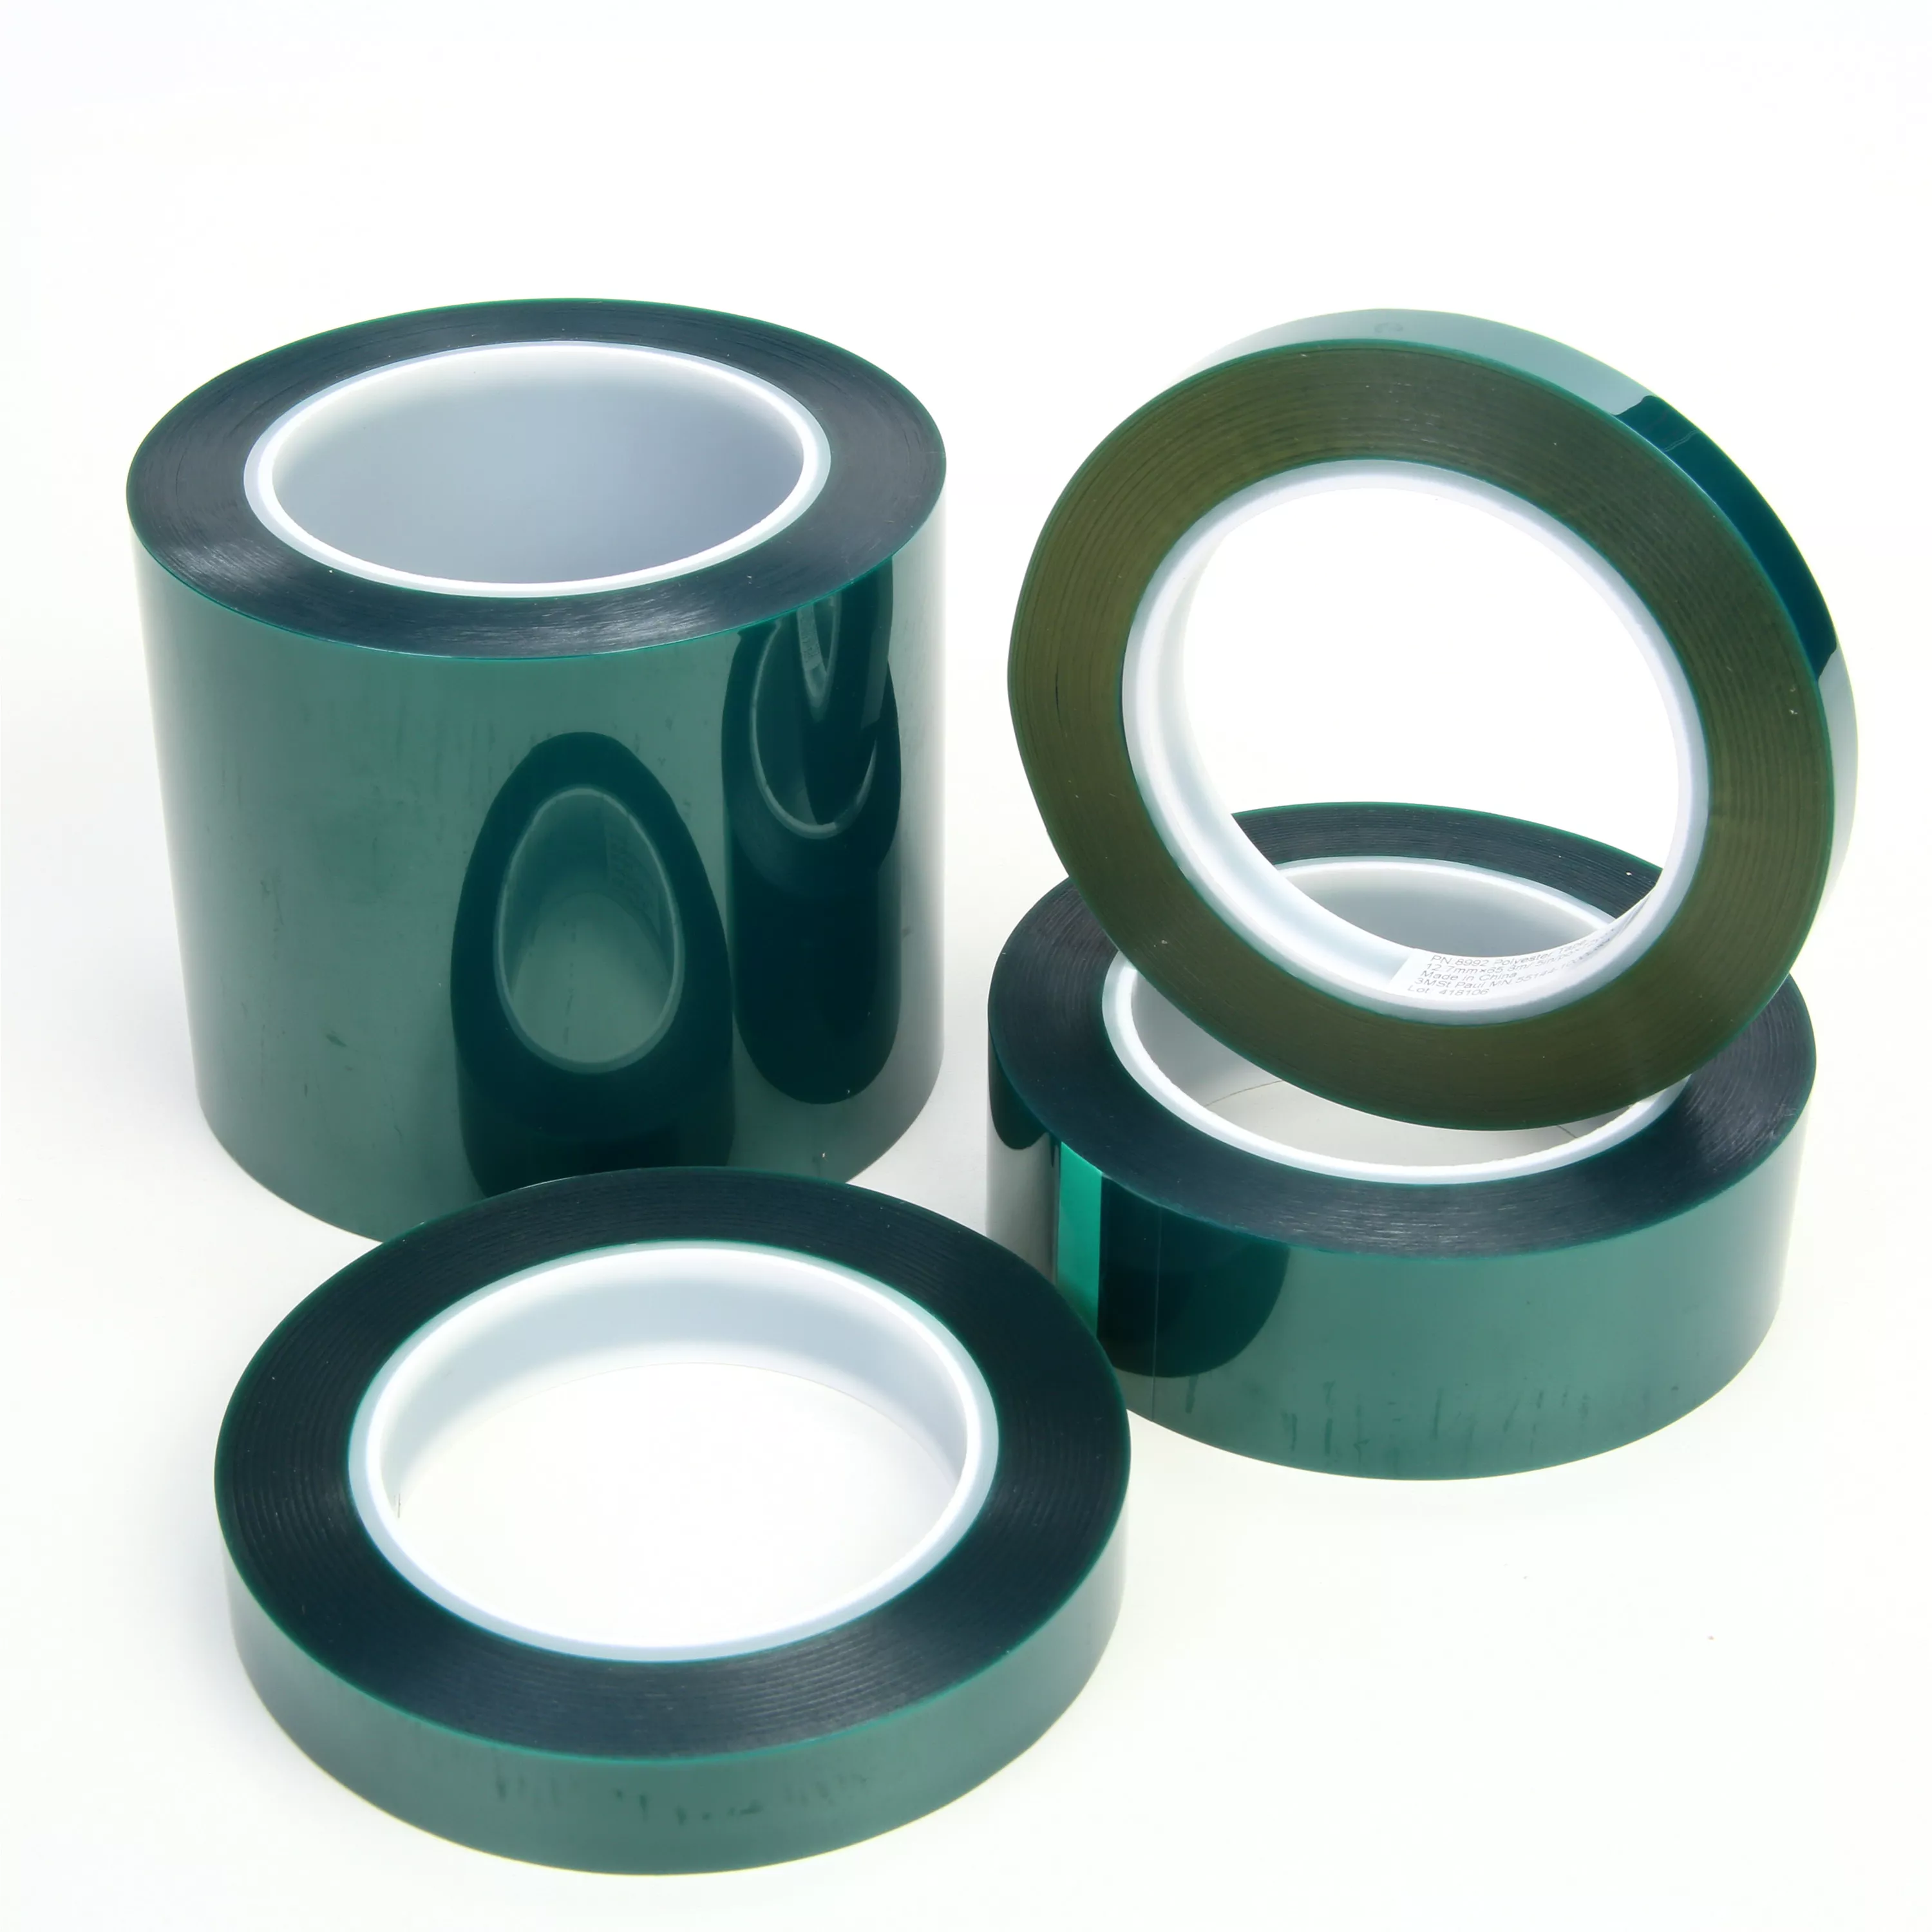 3M™ Polyester Tape 8992, Green, 2 1/2 in x 72 yd, 3.2 mil, 12 rolls per
case